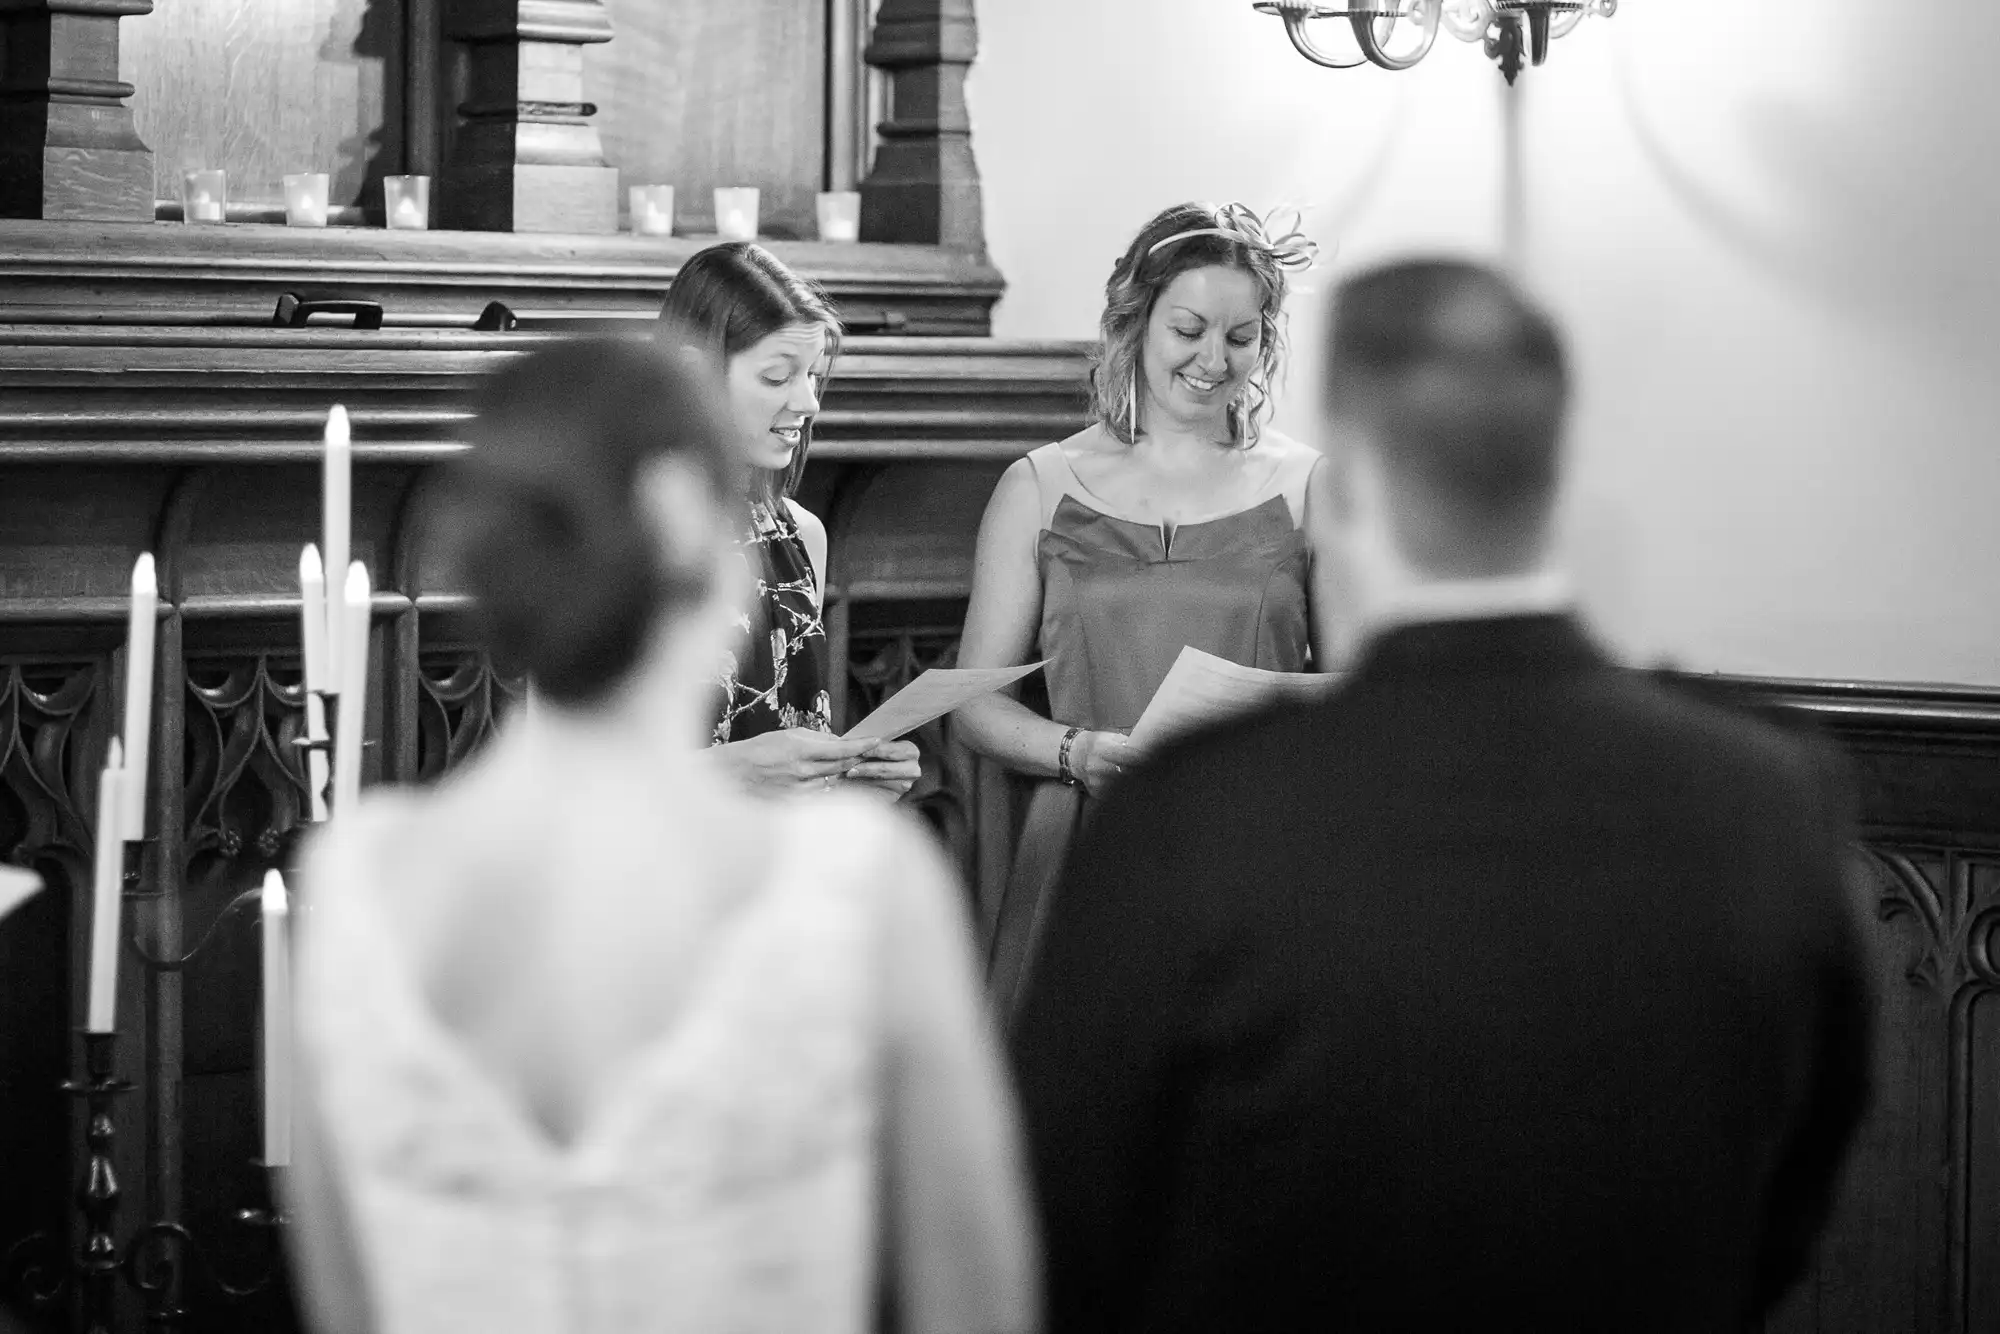 A bride and groom listen to a woman officiating their wedding in a church, captured in black and white.